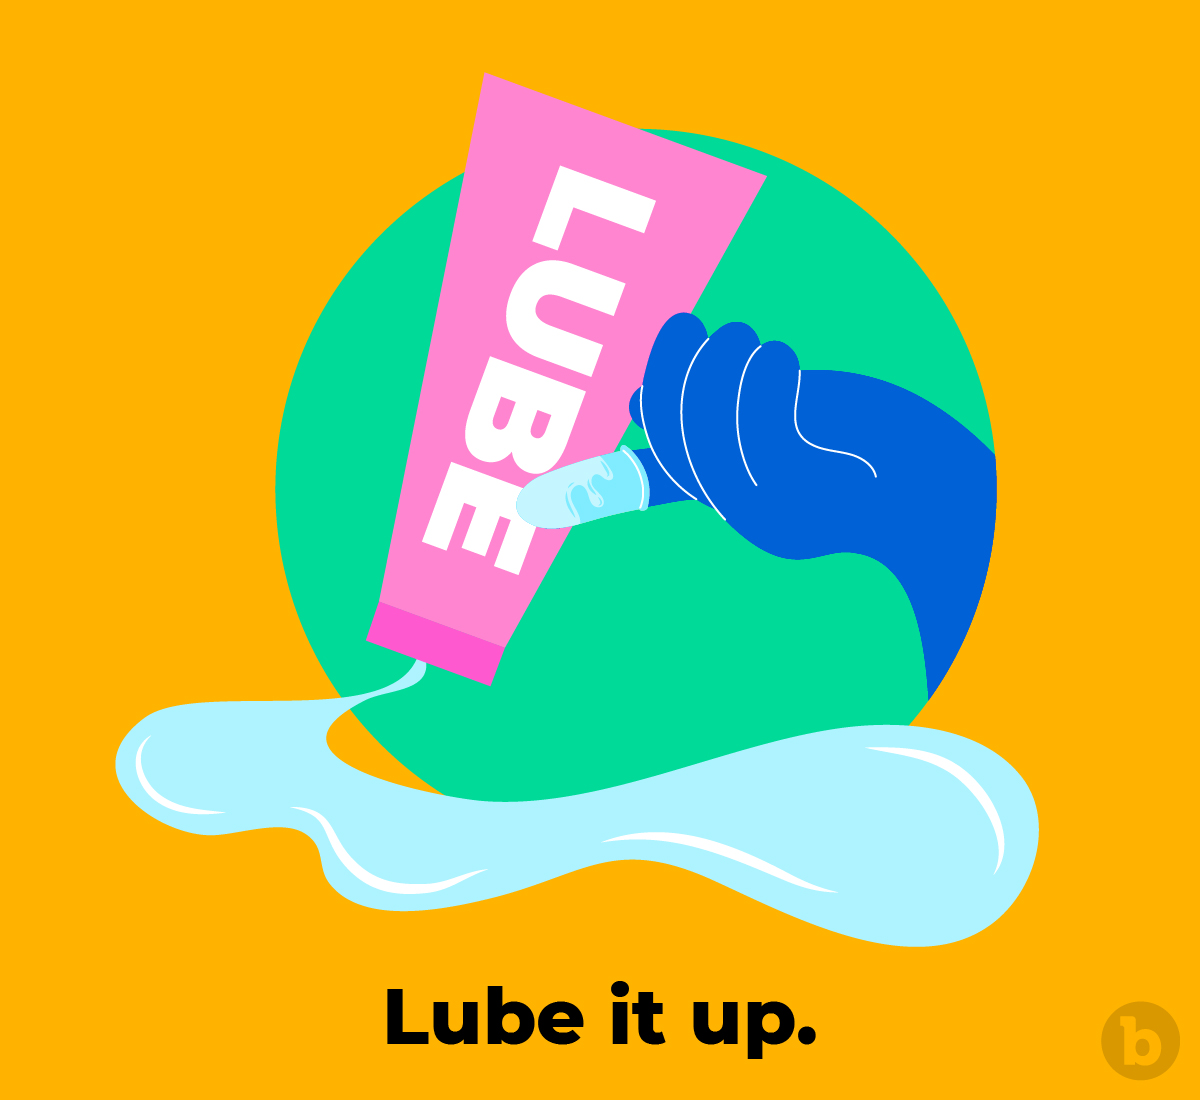 Always use lube when inserting anything up the butt during anal play